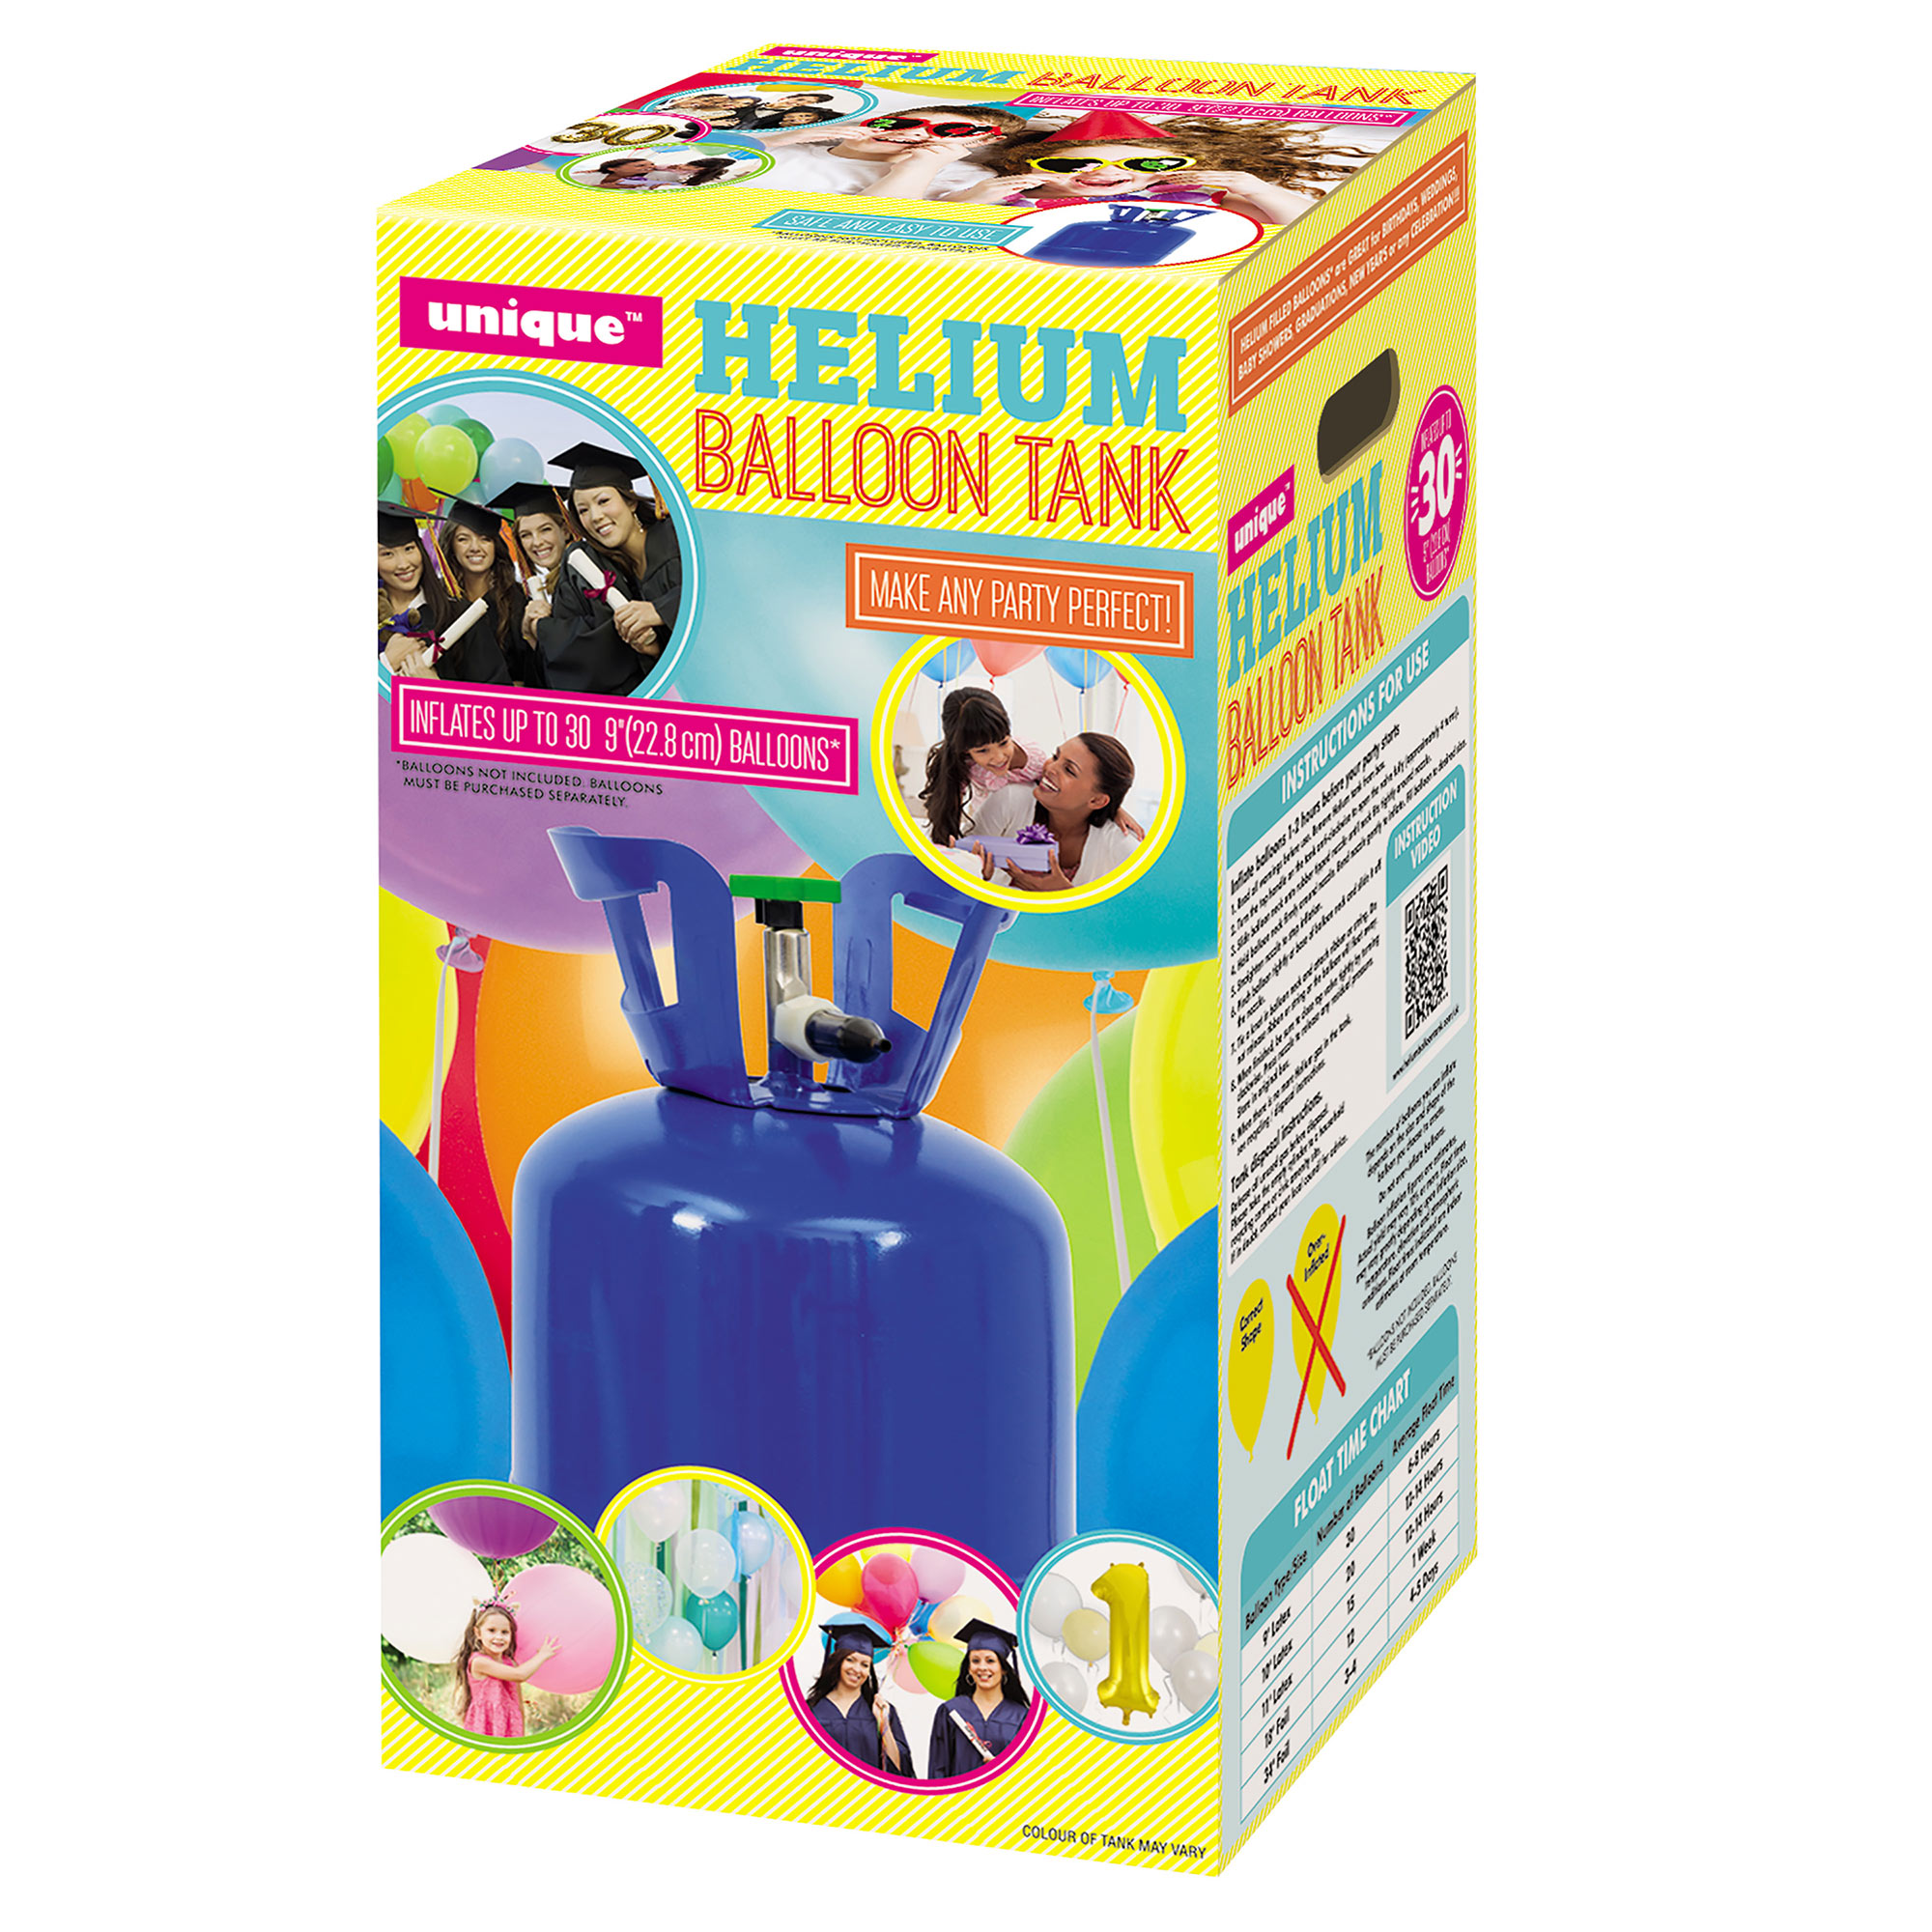 Helium Gas Canister - Fills Up To 30 Balloons* ONLINE EXCLUSIVE